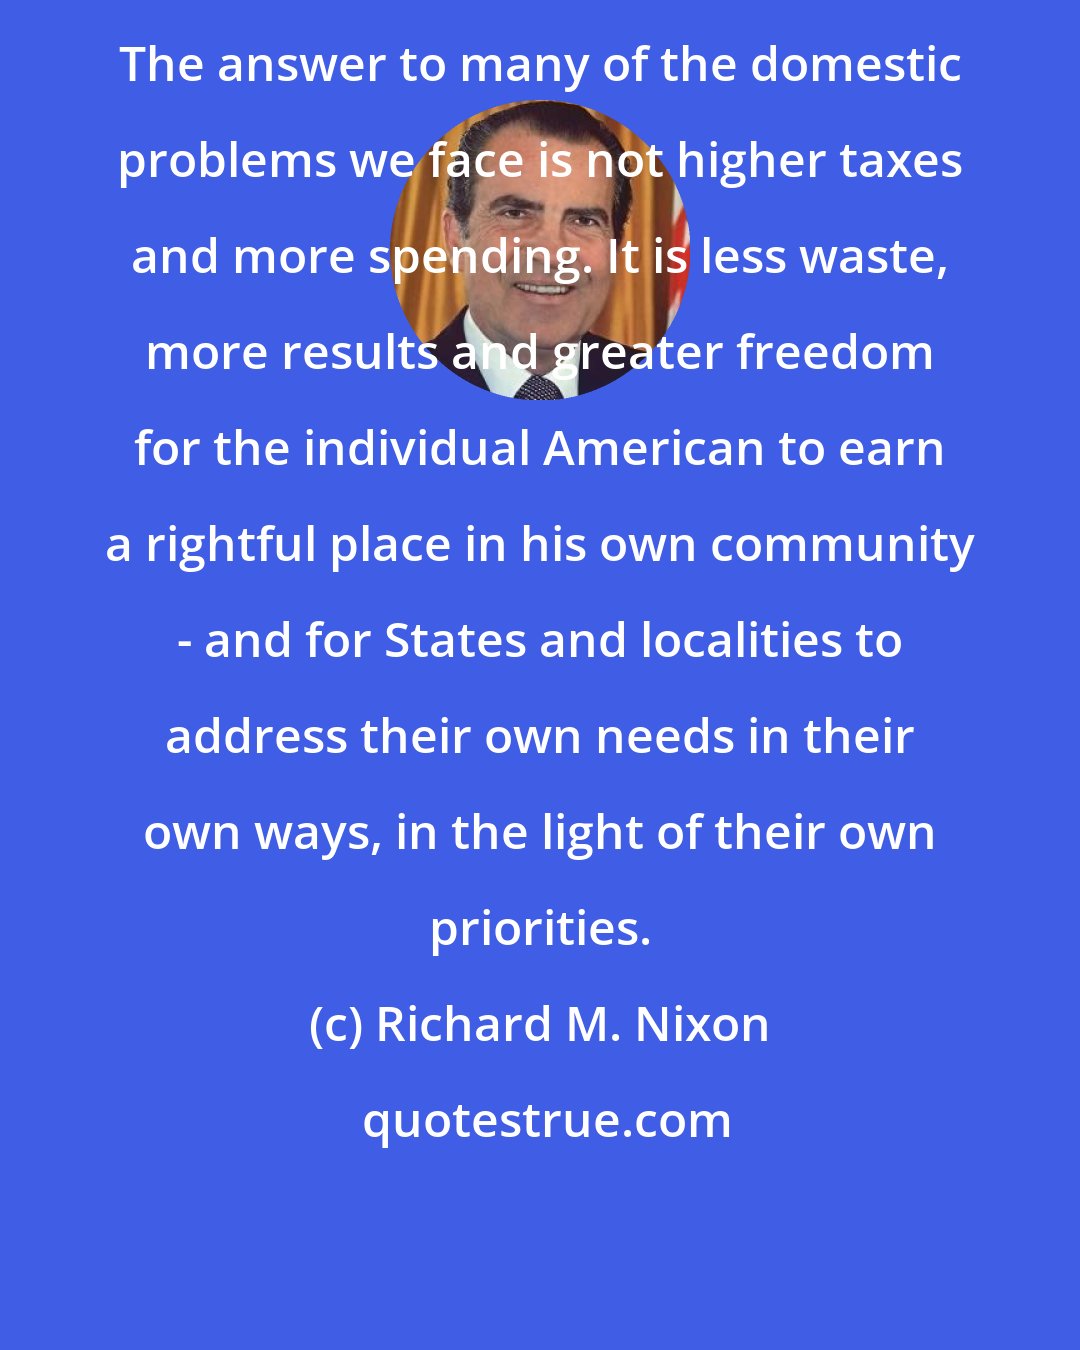 Richard M. Nixon: The answer to many of the domestic problems we face is not higher taxes and more spending. It is less waste, more results and greater freedom for the individual American to earn a rightful place in his own community - and for States and localities to address their own needs in their own ways, in the light of their own priorities.